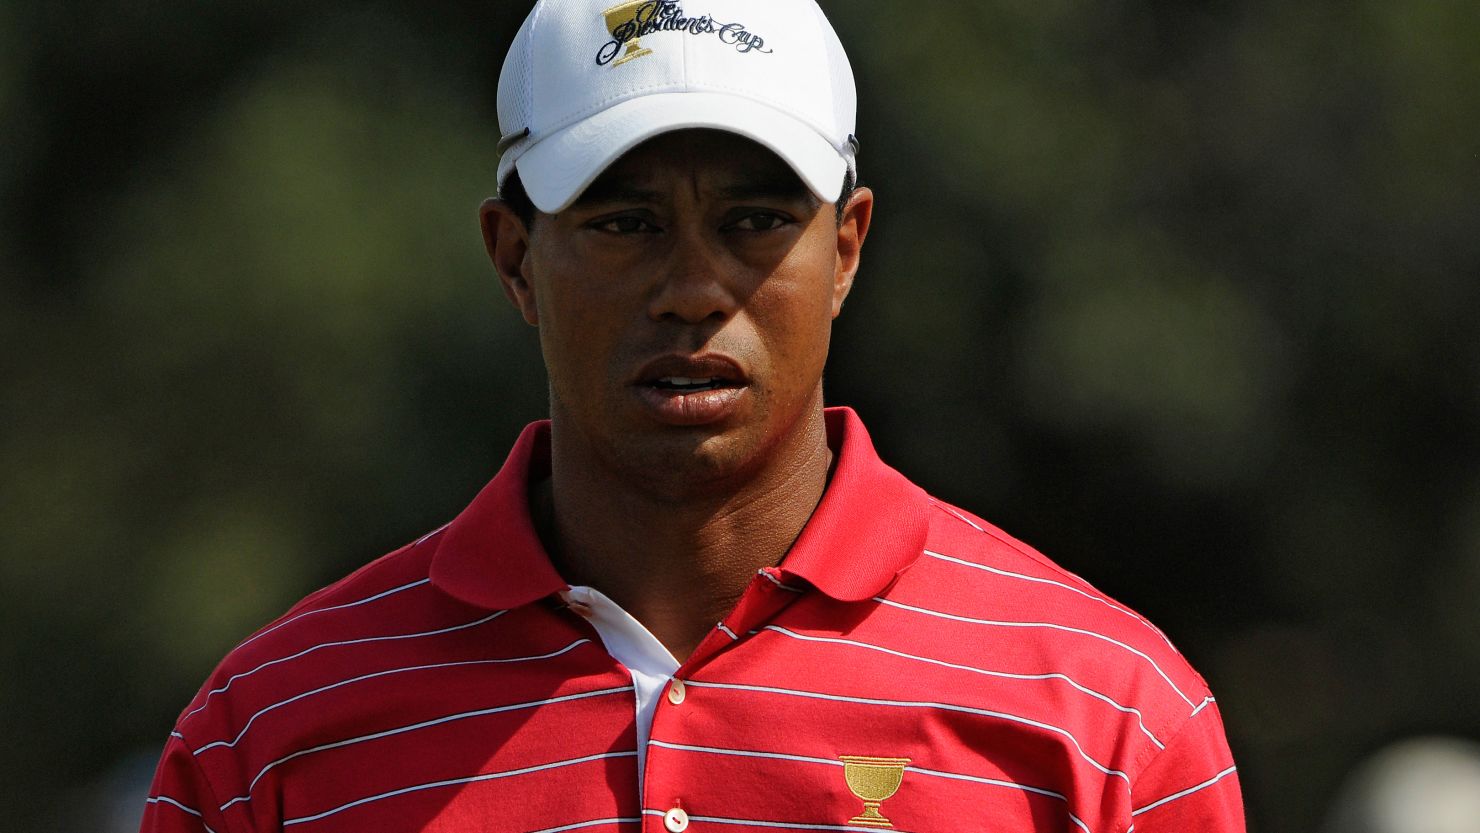 Tiger Woods carded his first birdie of the 2011 Presidents Cup at the fourth hole on Friday.